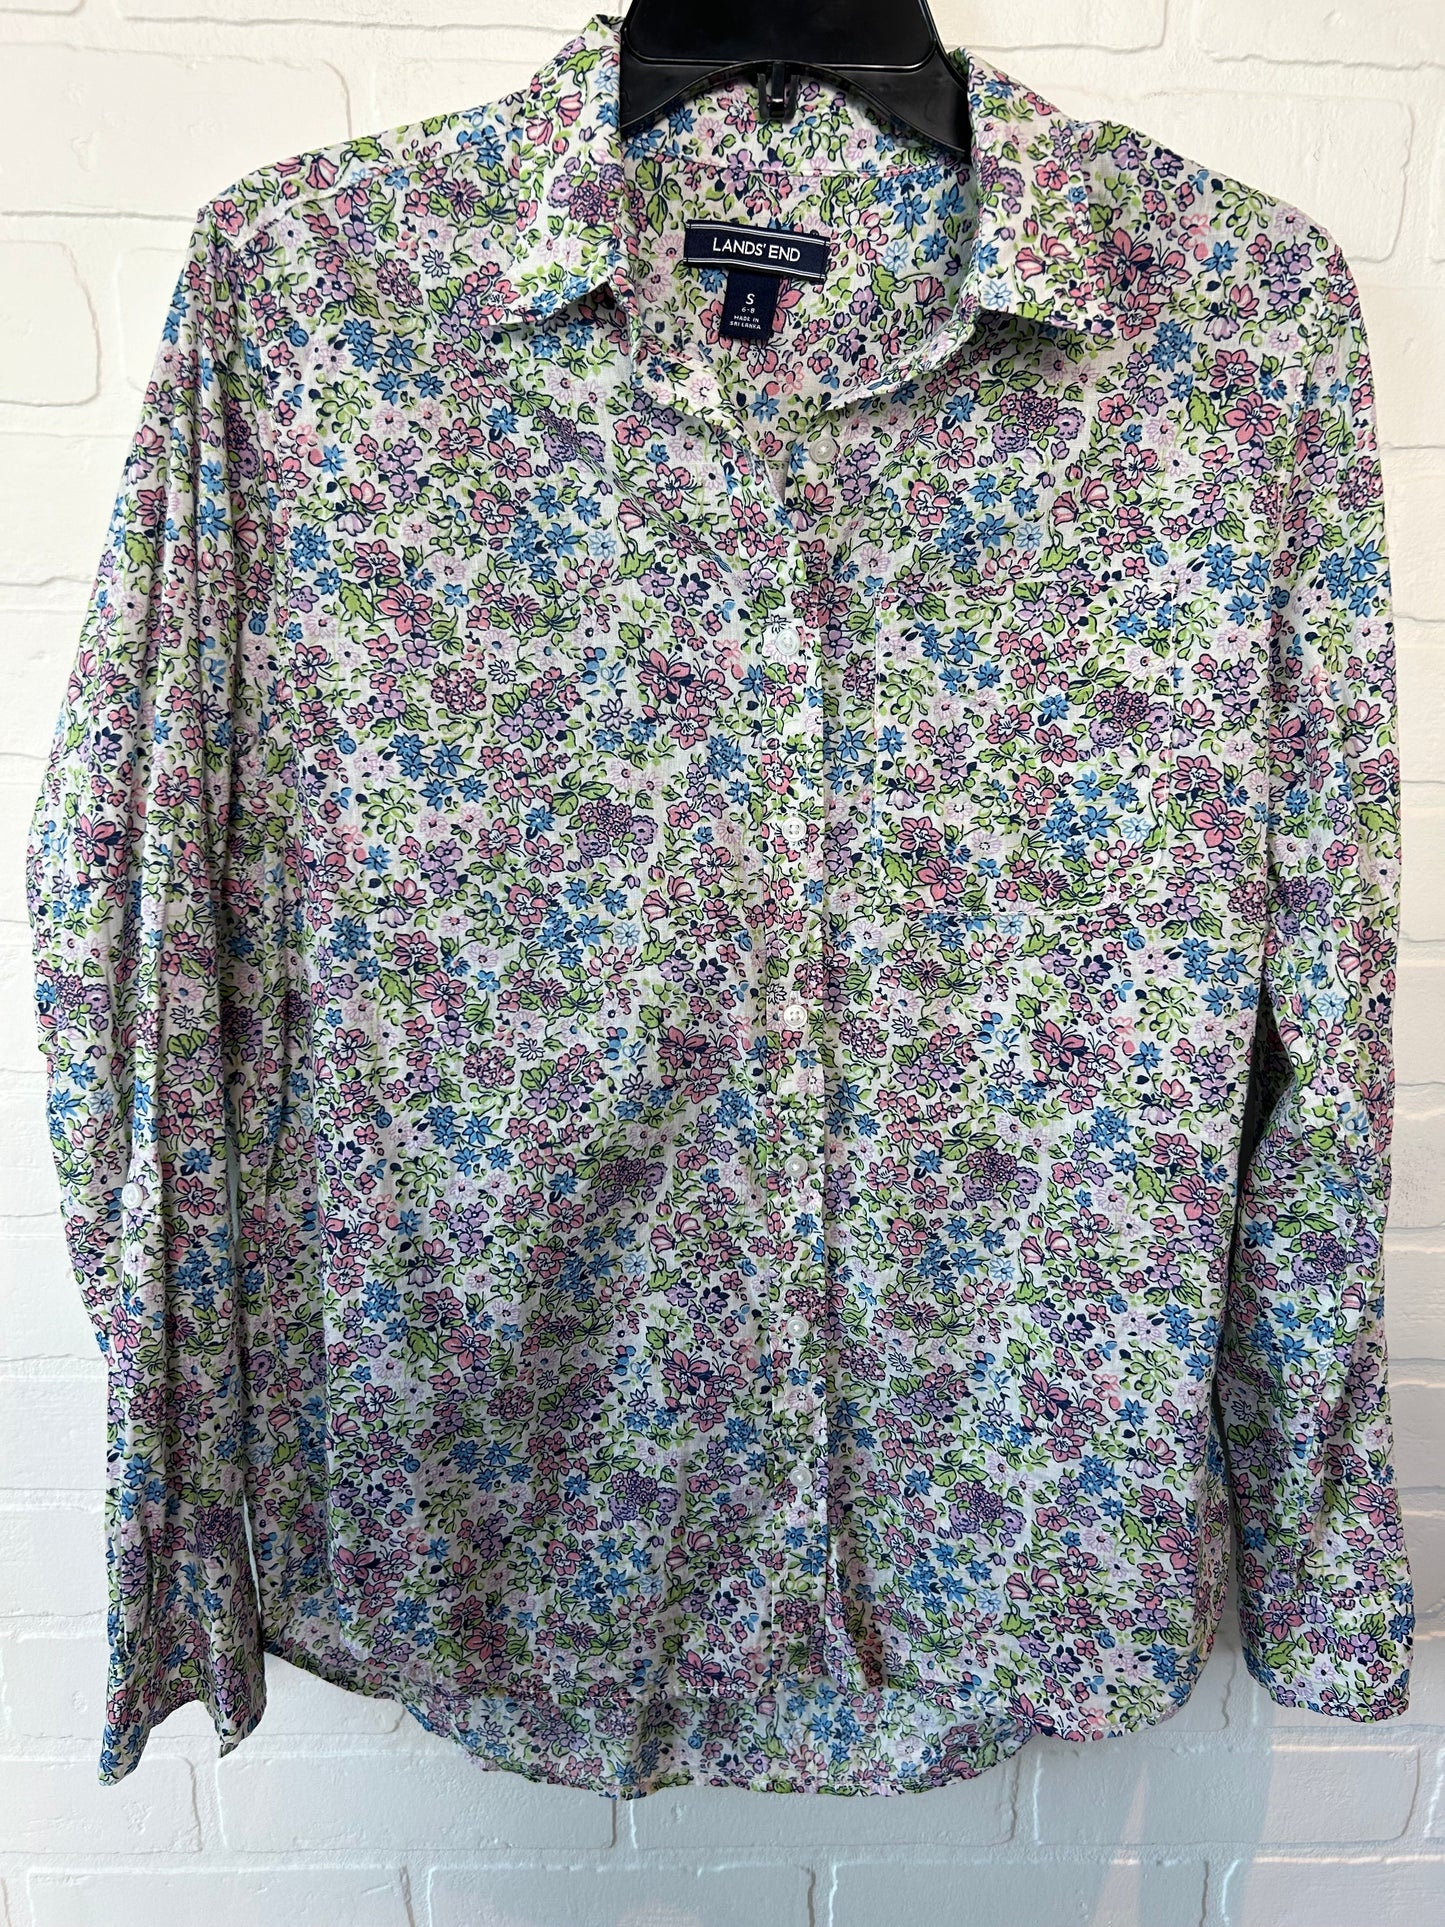 White Blouse Long Sleeve Lands End, Size S